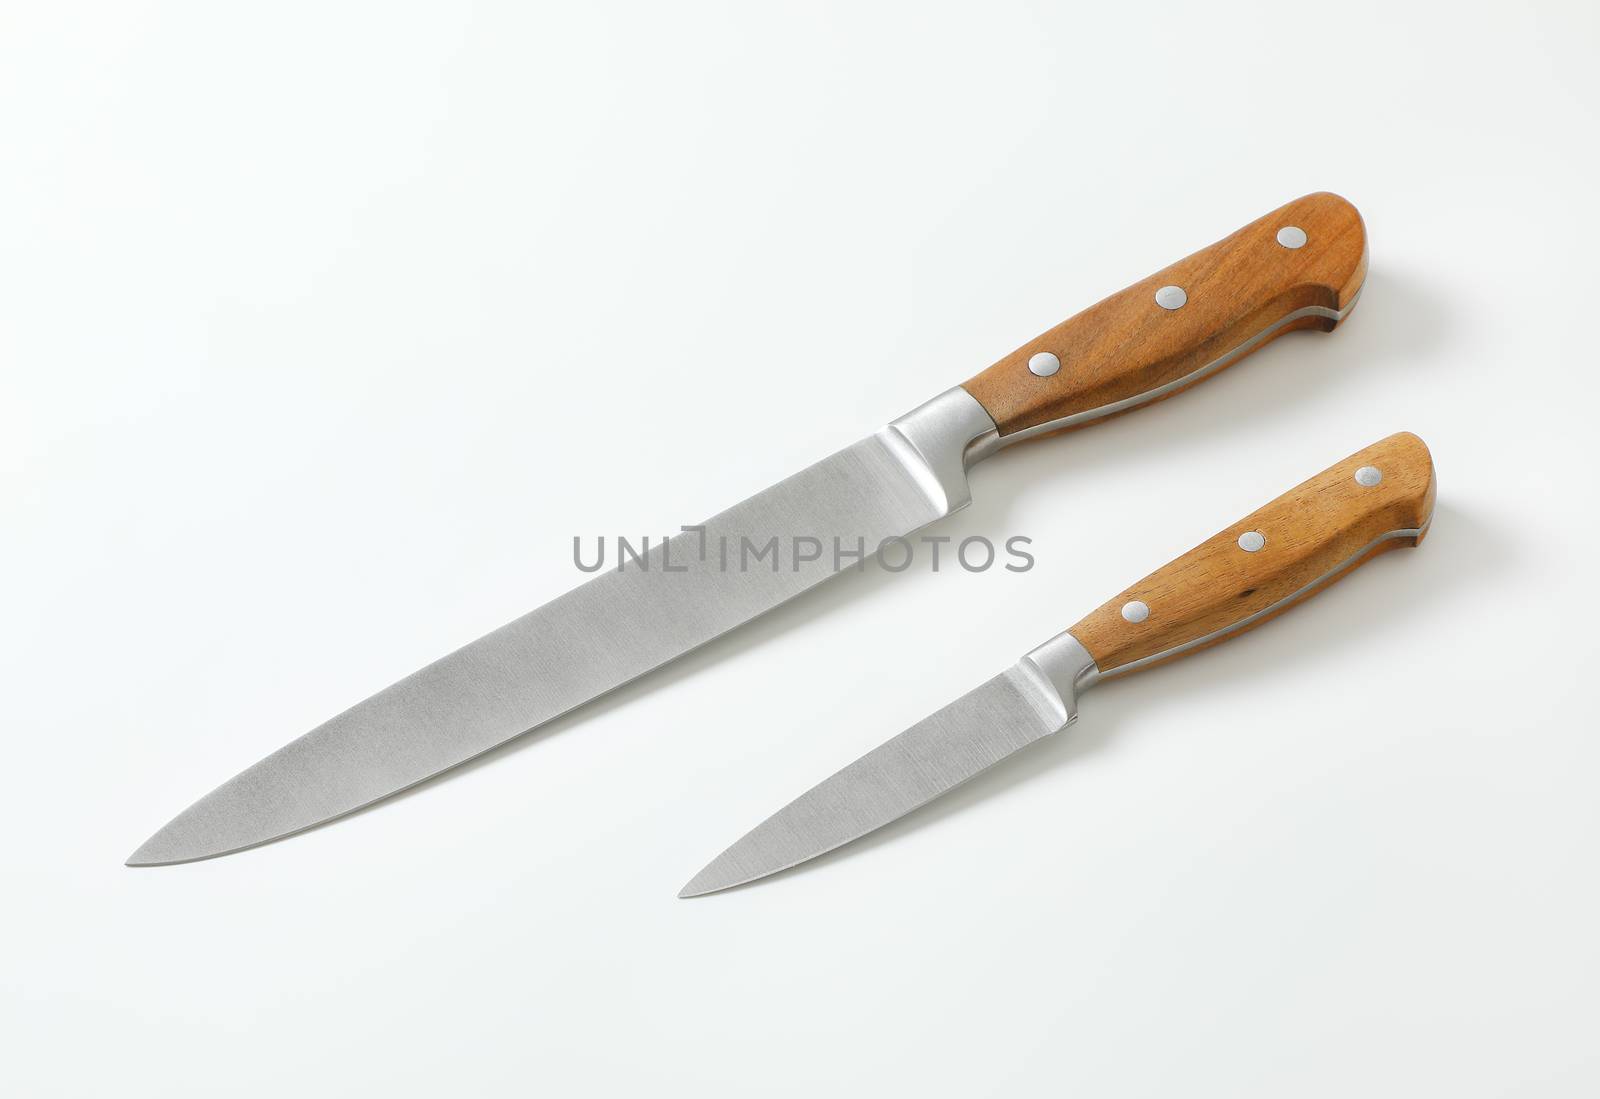 Set of two sharp pointed tip kitchen knives (Utility knife and Paring knife)